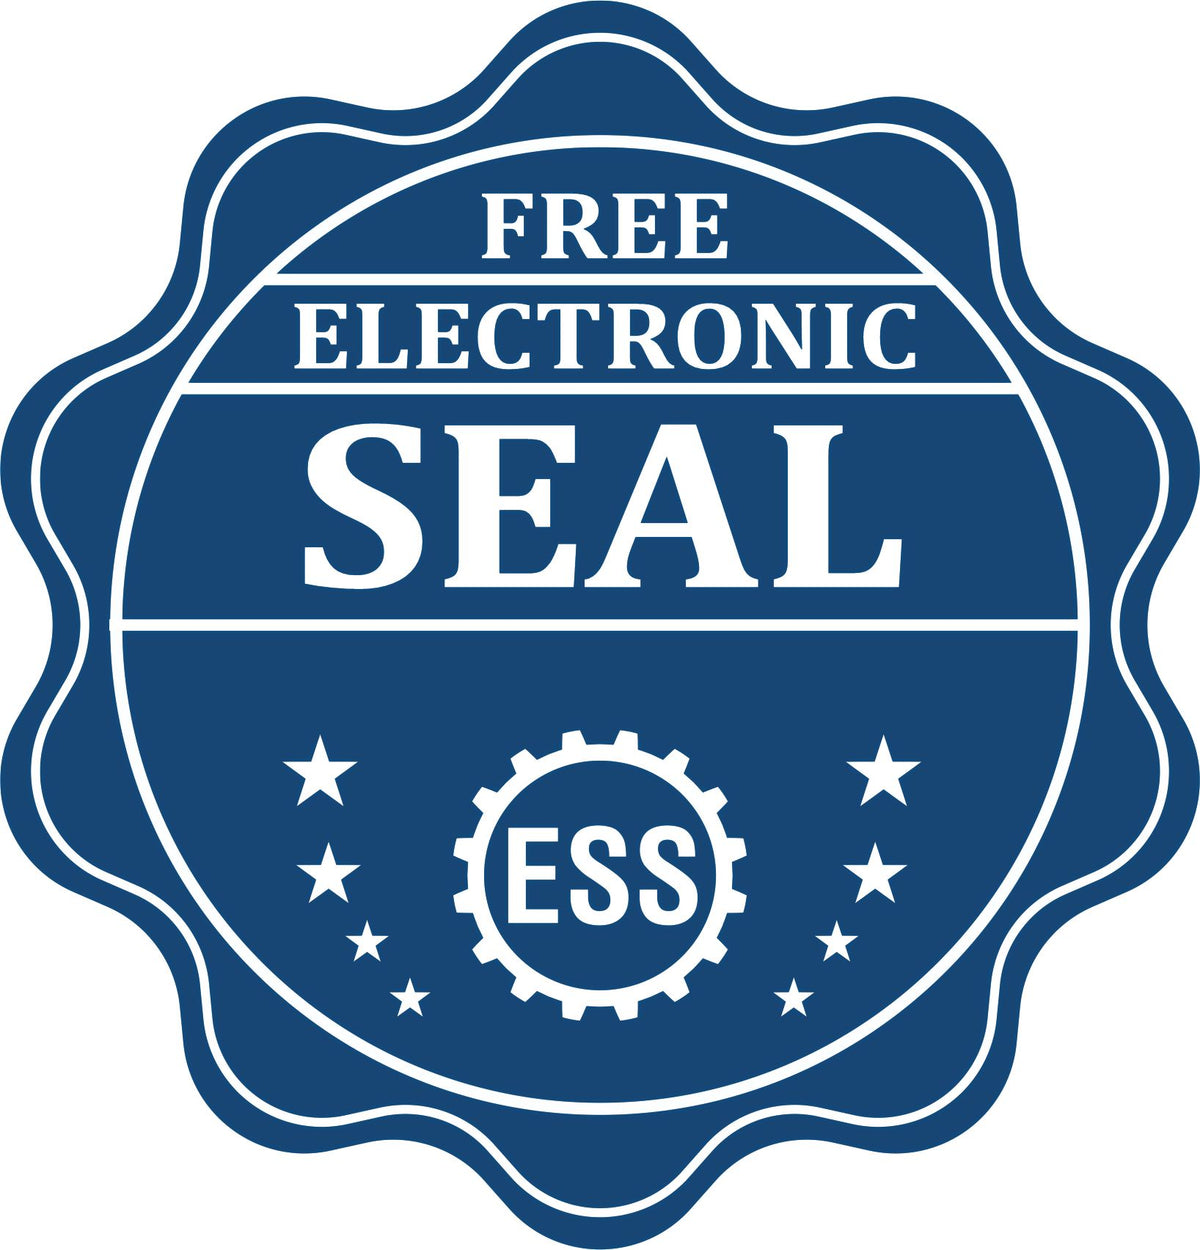 A badge showing a free electronic seal for the Gift Florida Landscape Architect Seal with stars and the ESS gear on the emblem.